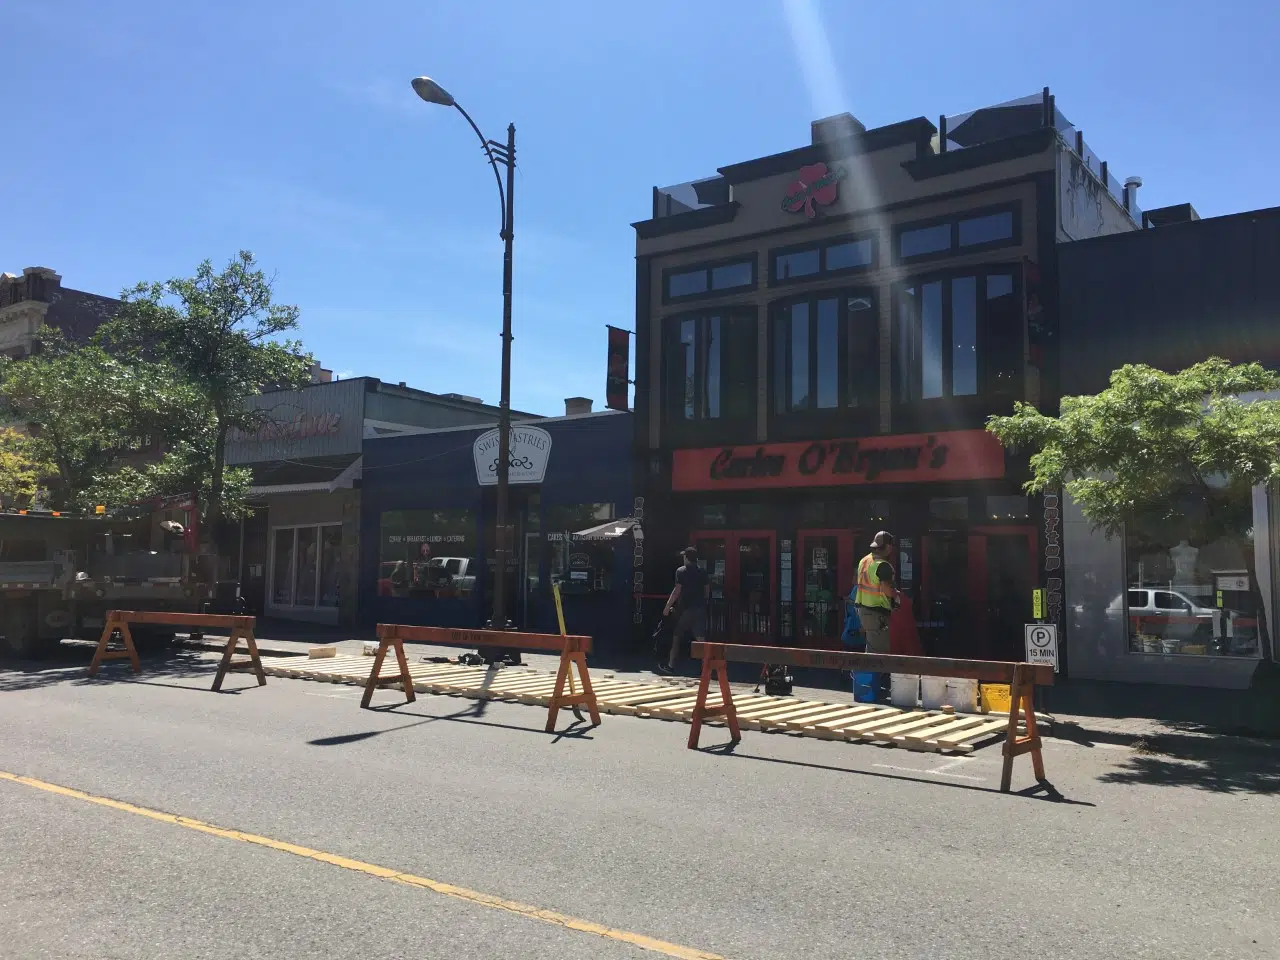 KCBIA says downtown restaurant owners cautiously optimistic as they expand their patios